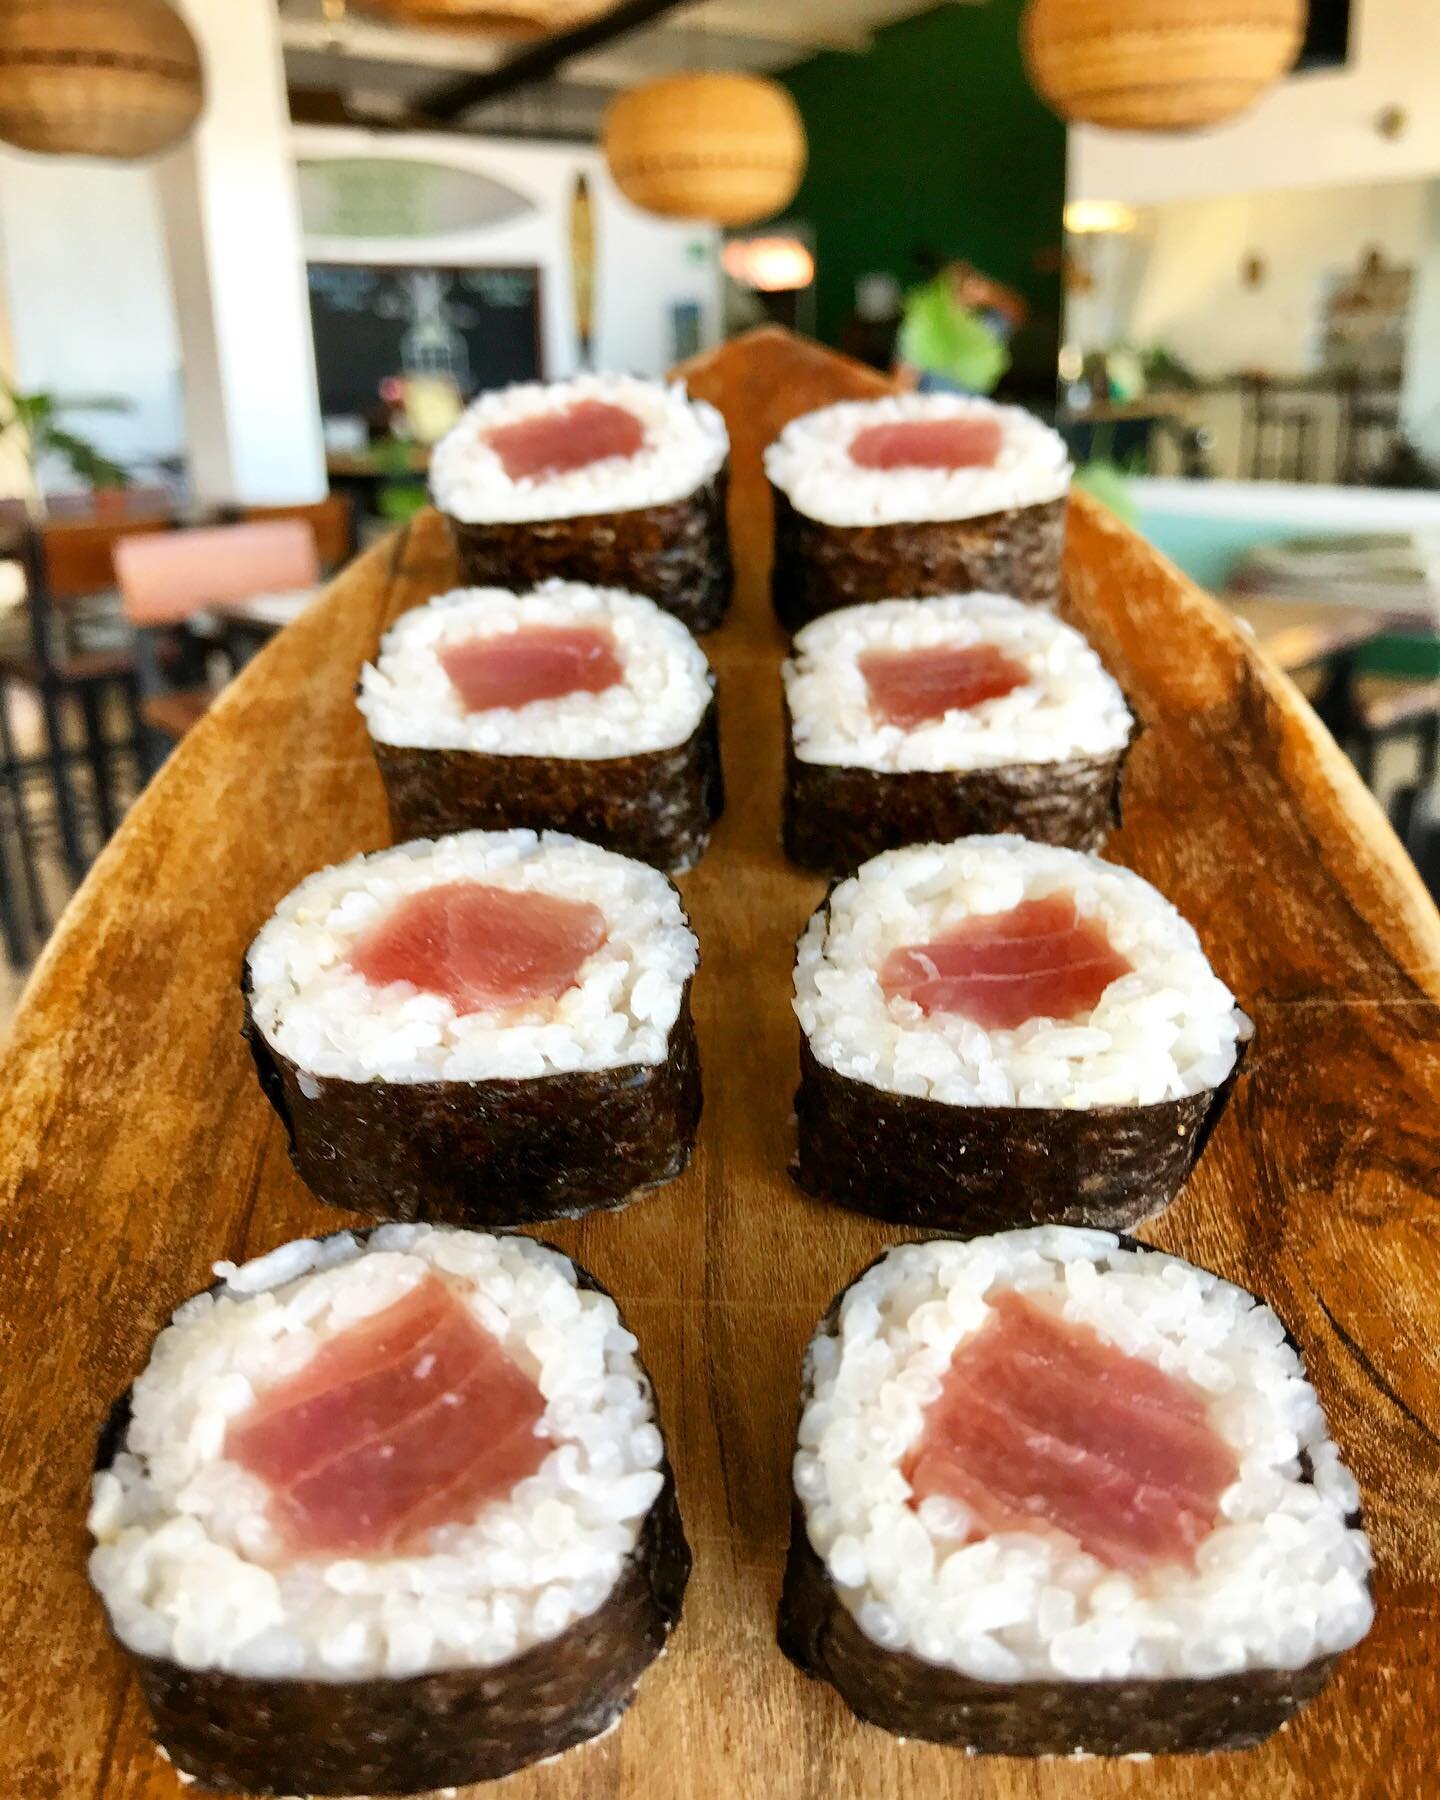 This Friday&rsquo;s sushi special : classic tuna maki roll 🍣🥢 Thick, fresh ahi tuna, sushi rice and nori. Enjoy sushi, delicious cocktails, wine &amp; sake on the beach 🌴🍶